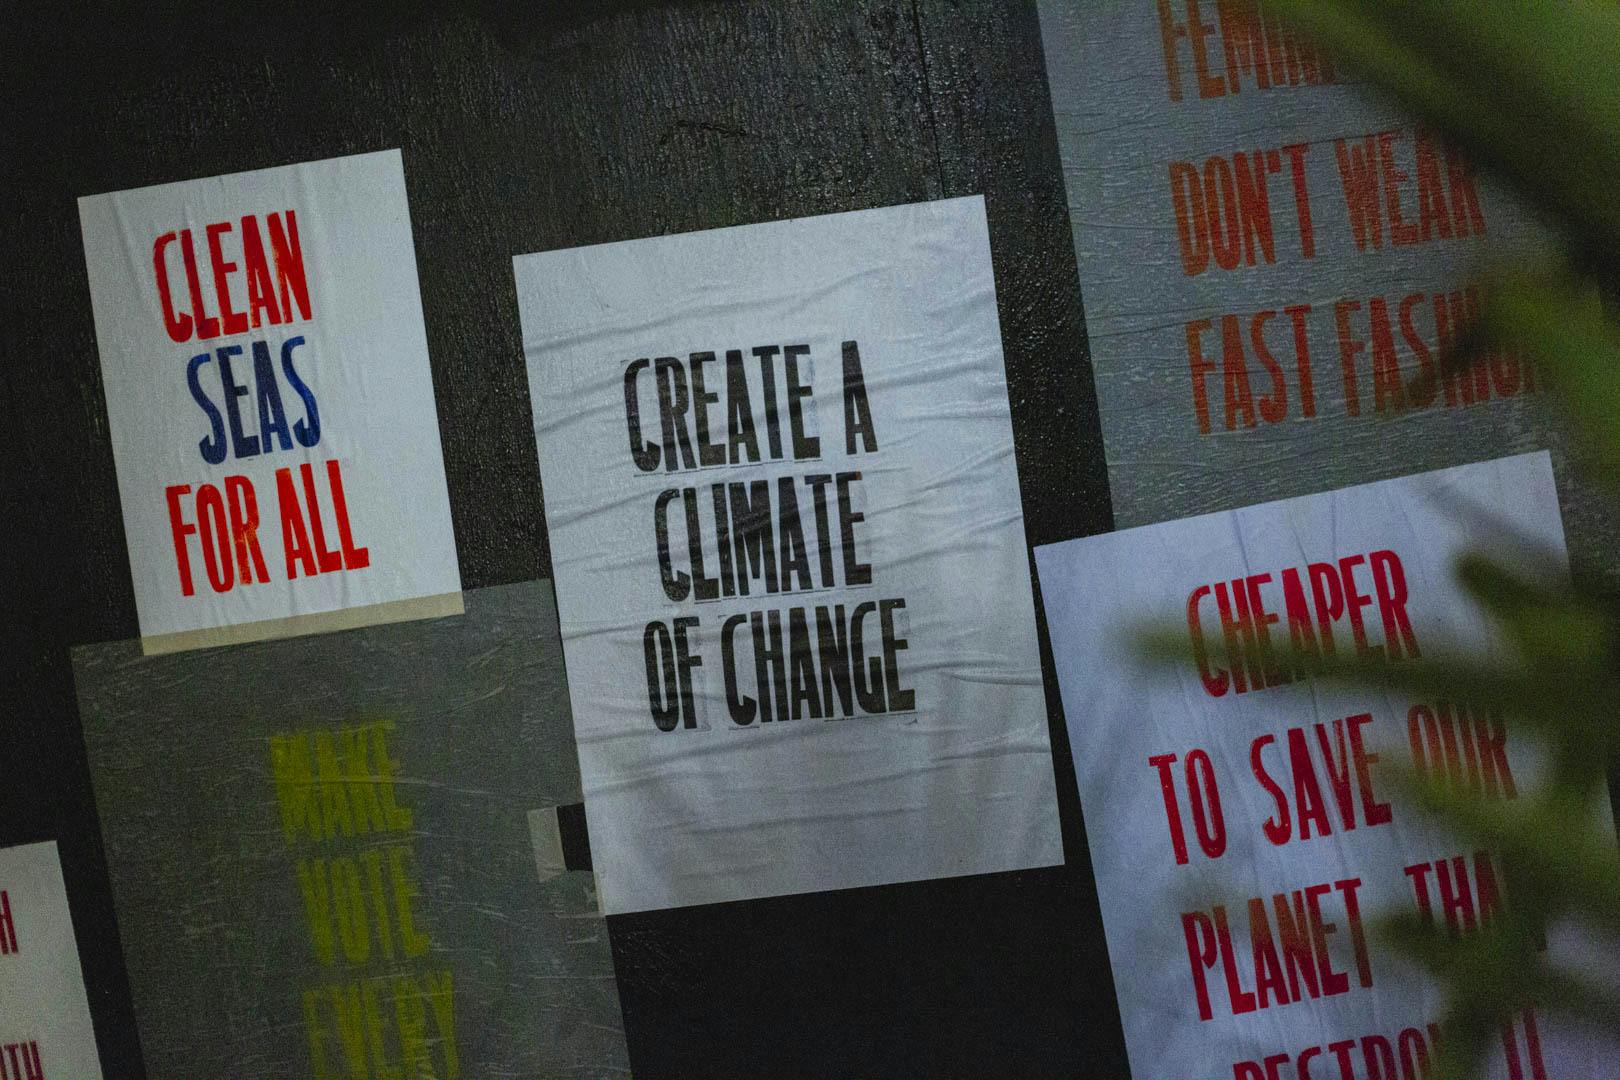 Truth Wall Print at Action Ocean Studios 2022.  There are white posters with coloured type saying "Create a Climate of Change" and "Clean Seas for All"